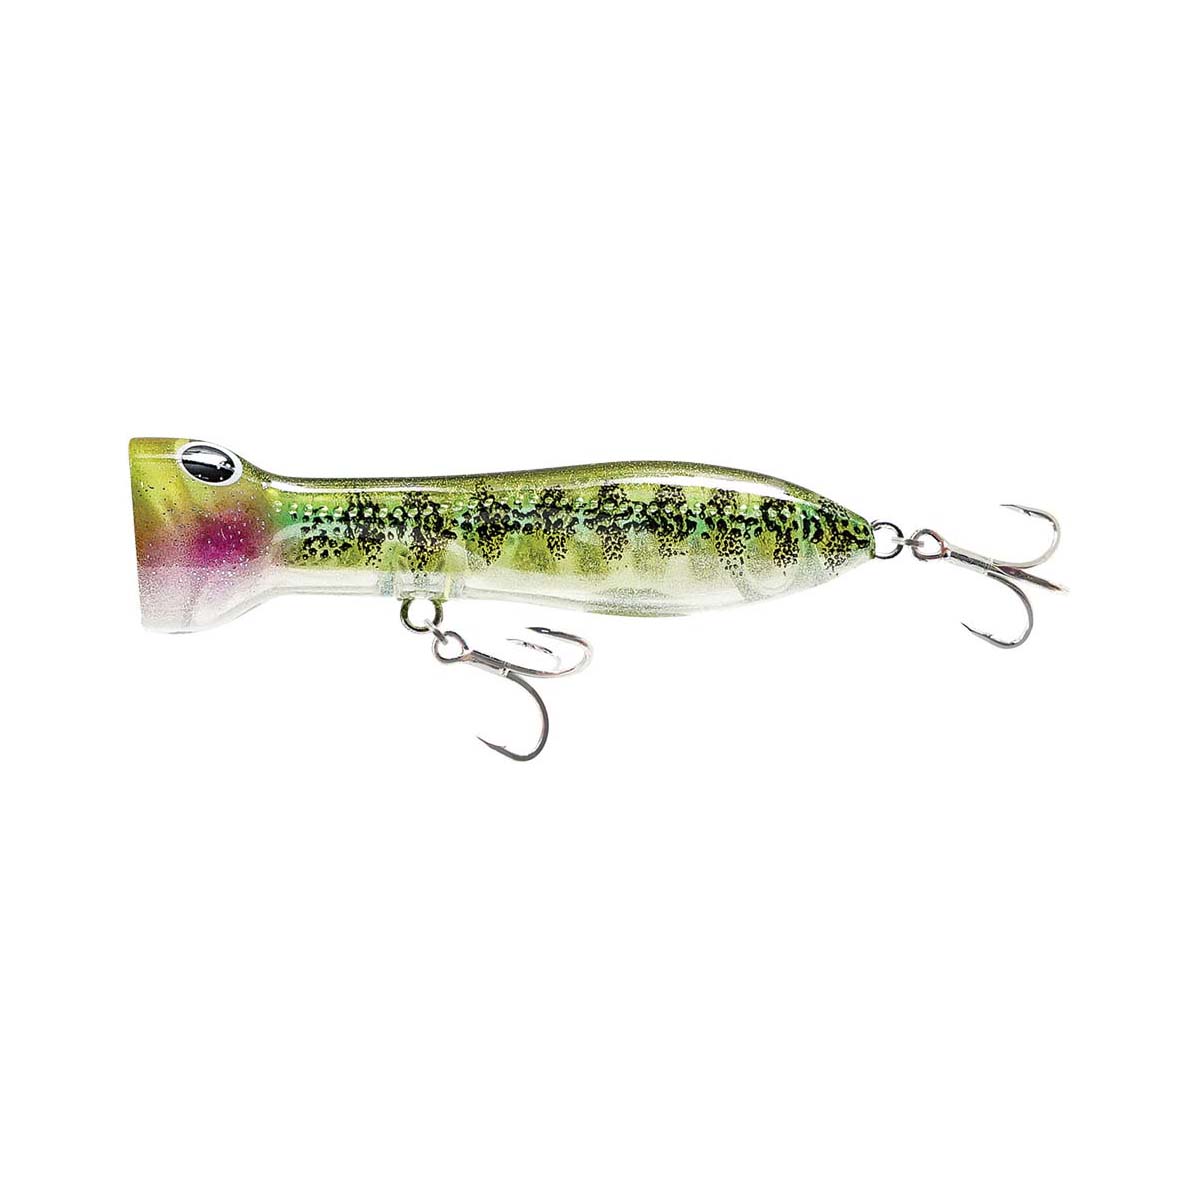 Nomad Chug Norris Surface Lure 5cm Ghost Green Bandit